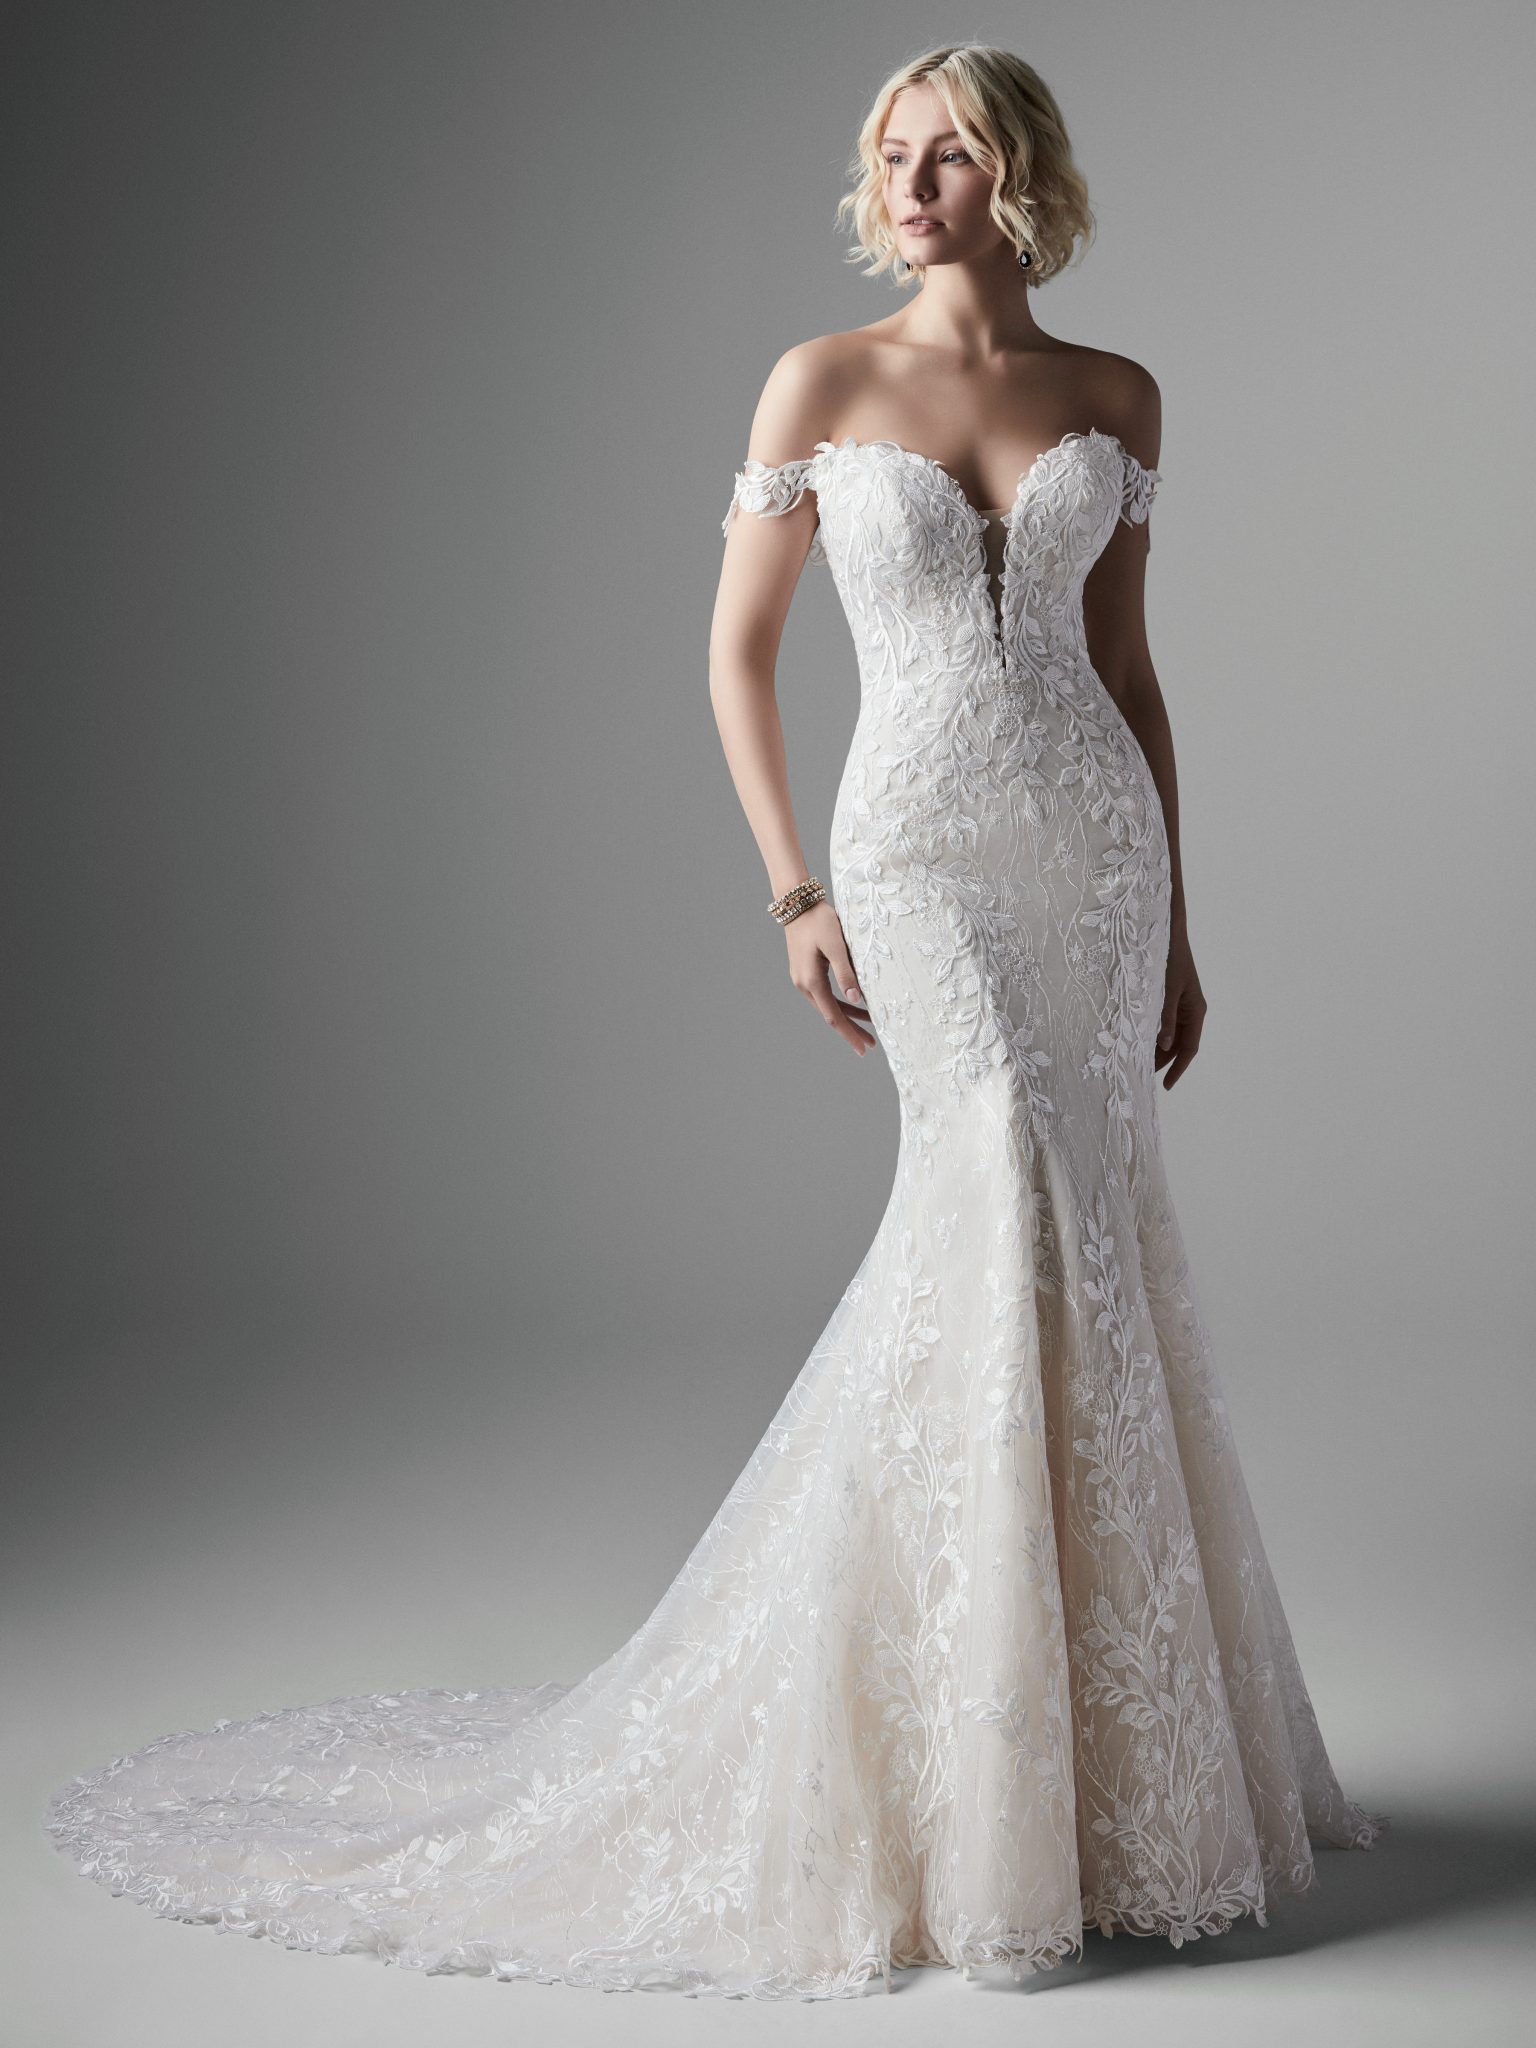 Mermaid Wedding Dresses for Brides with an Hourglass Figure